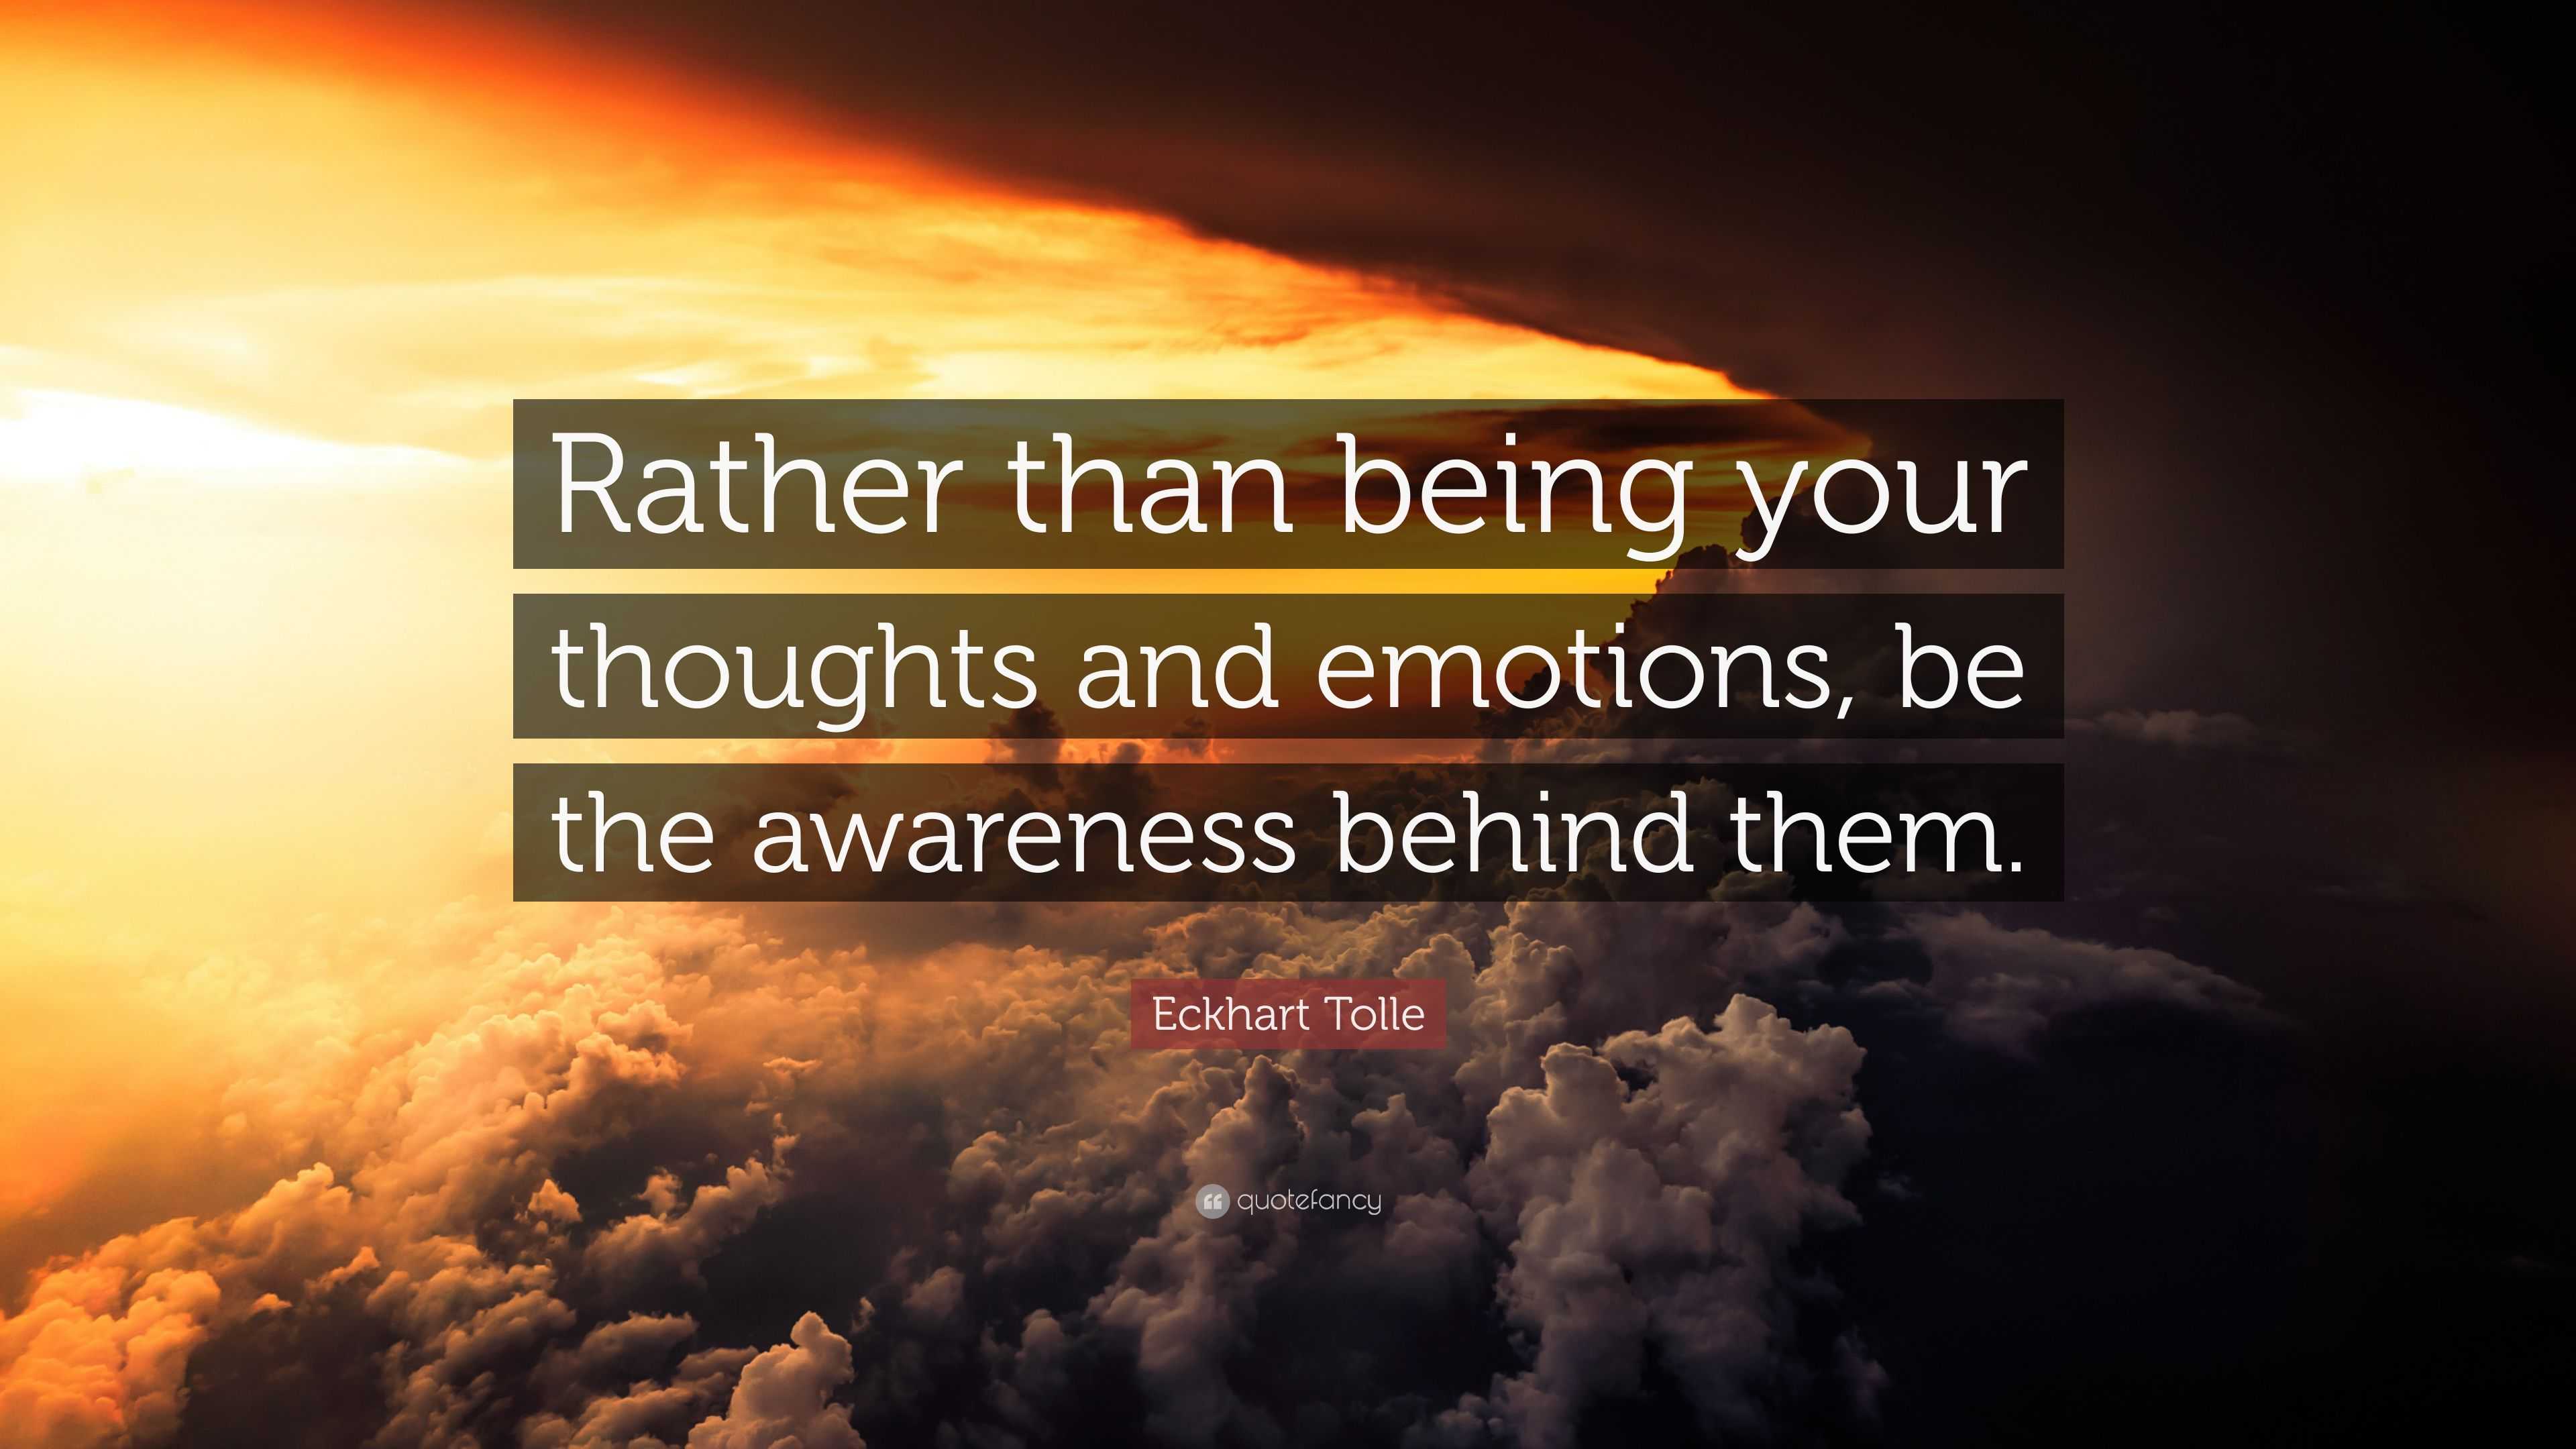 Eckhart Tolle Quote “Rather than being your thoughts and